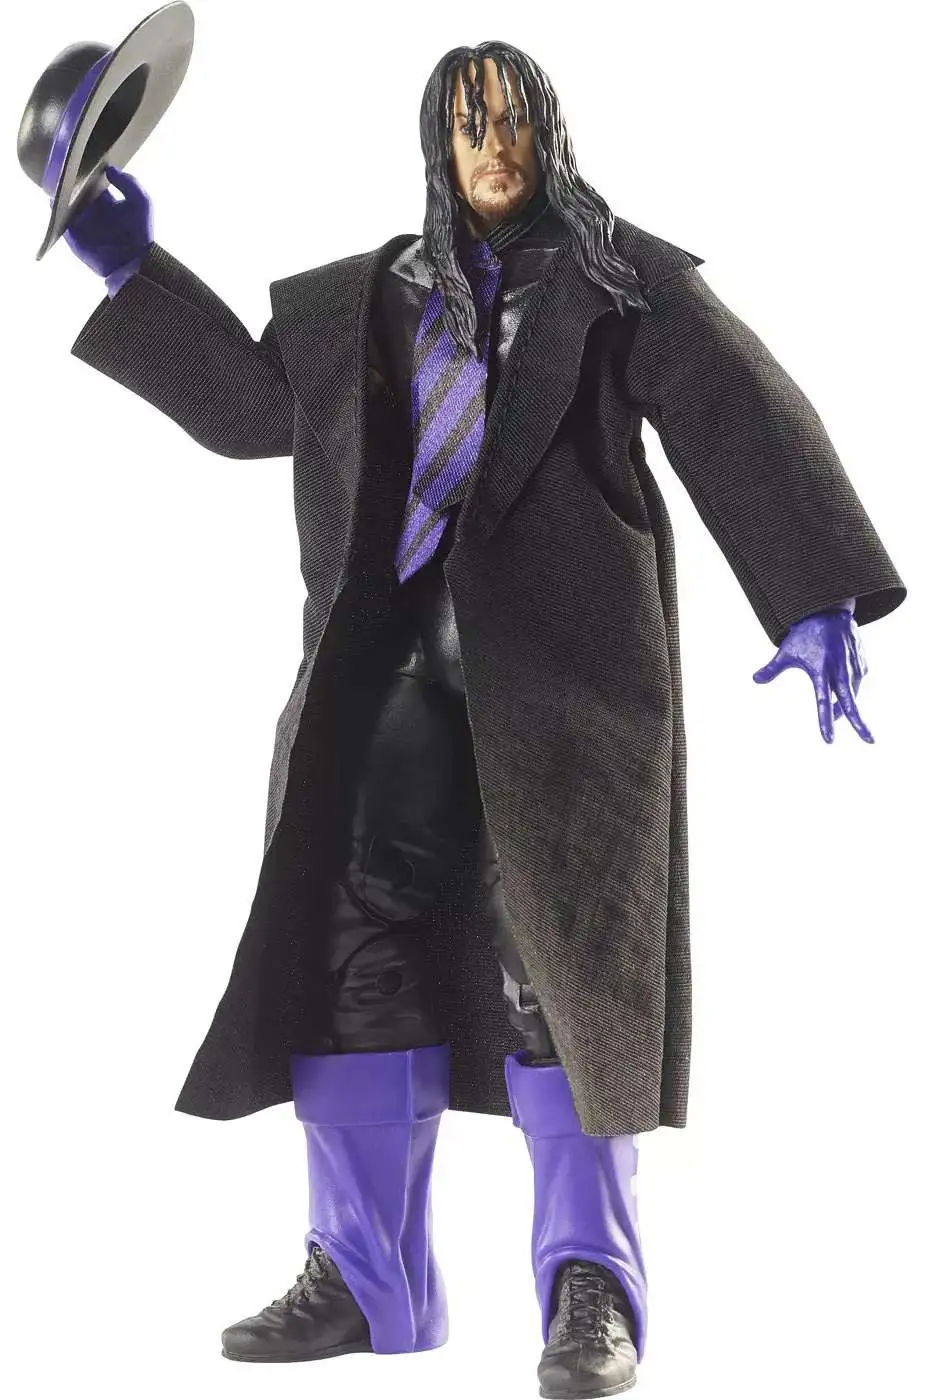 WWE Elite Collection Legends Series 9: THE UNDERTAKER – Needless